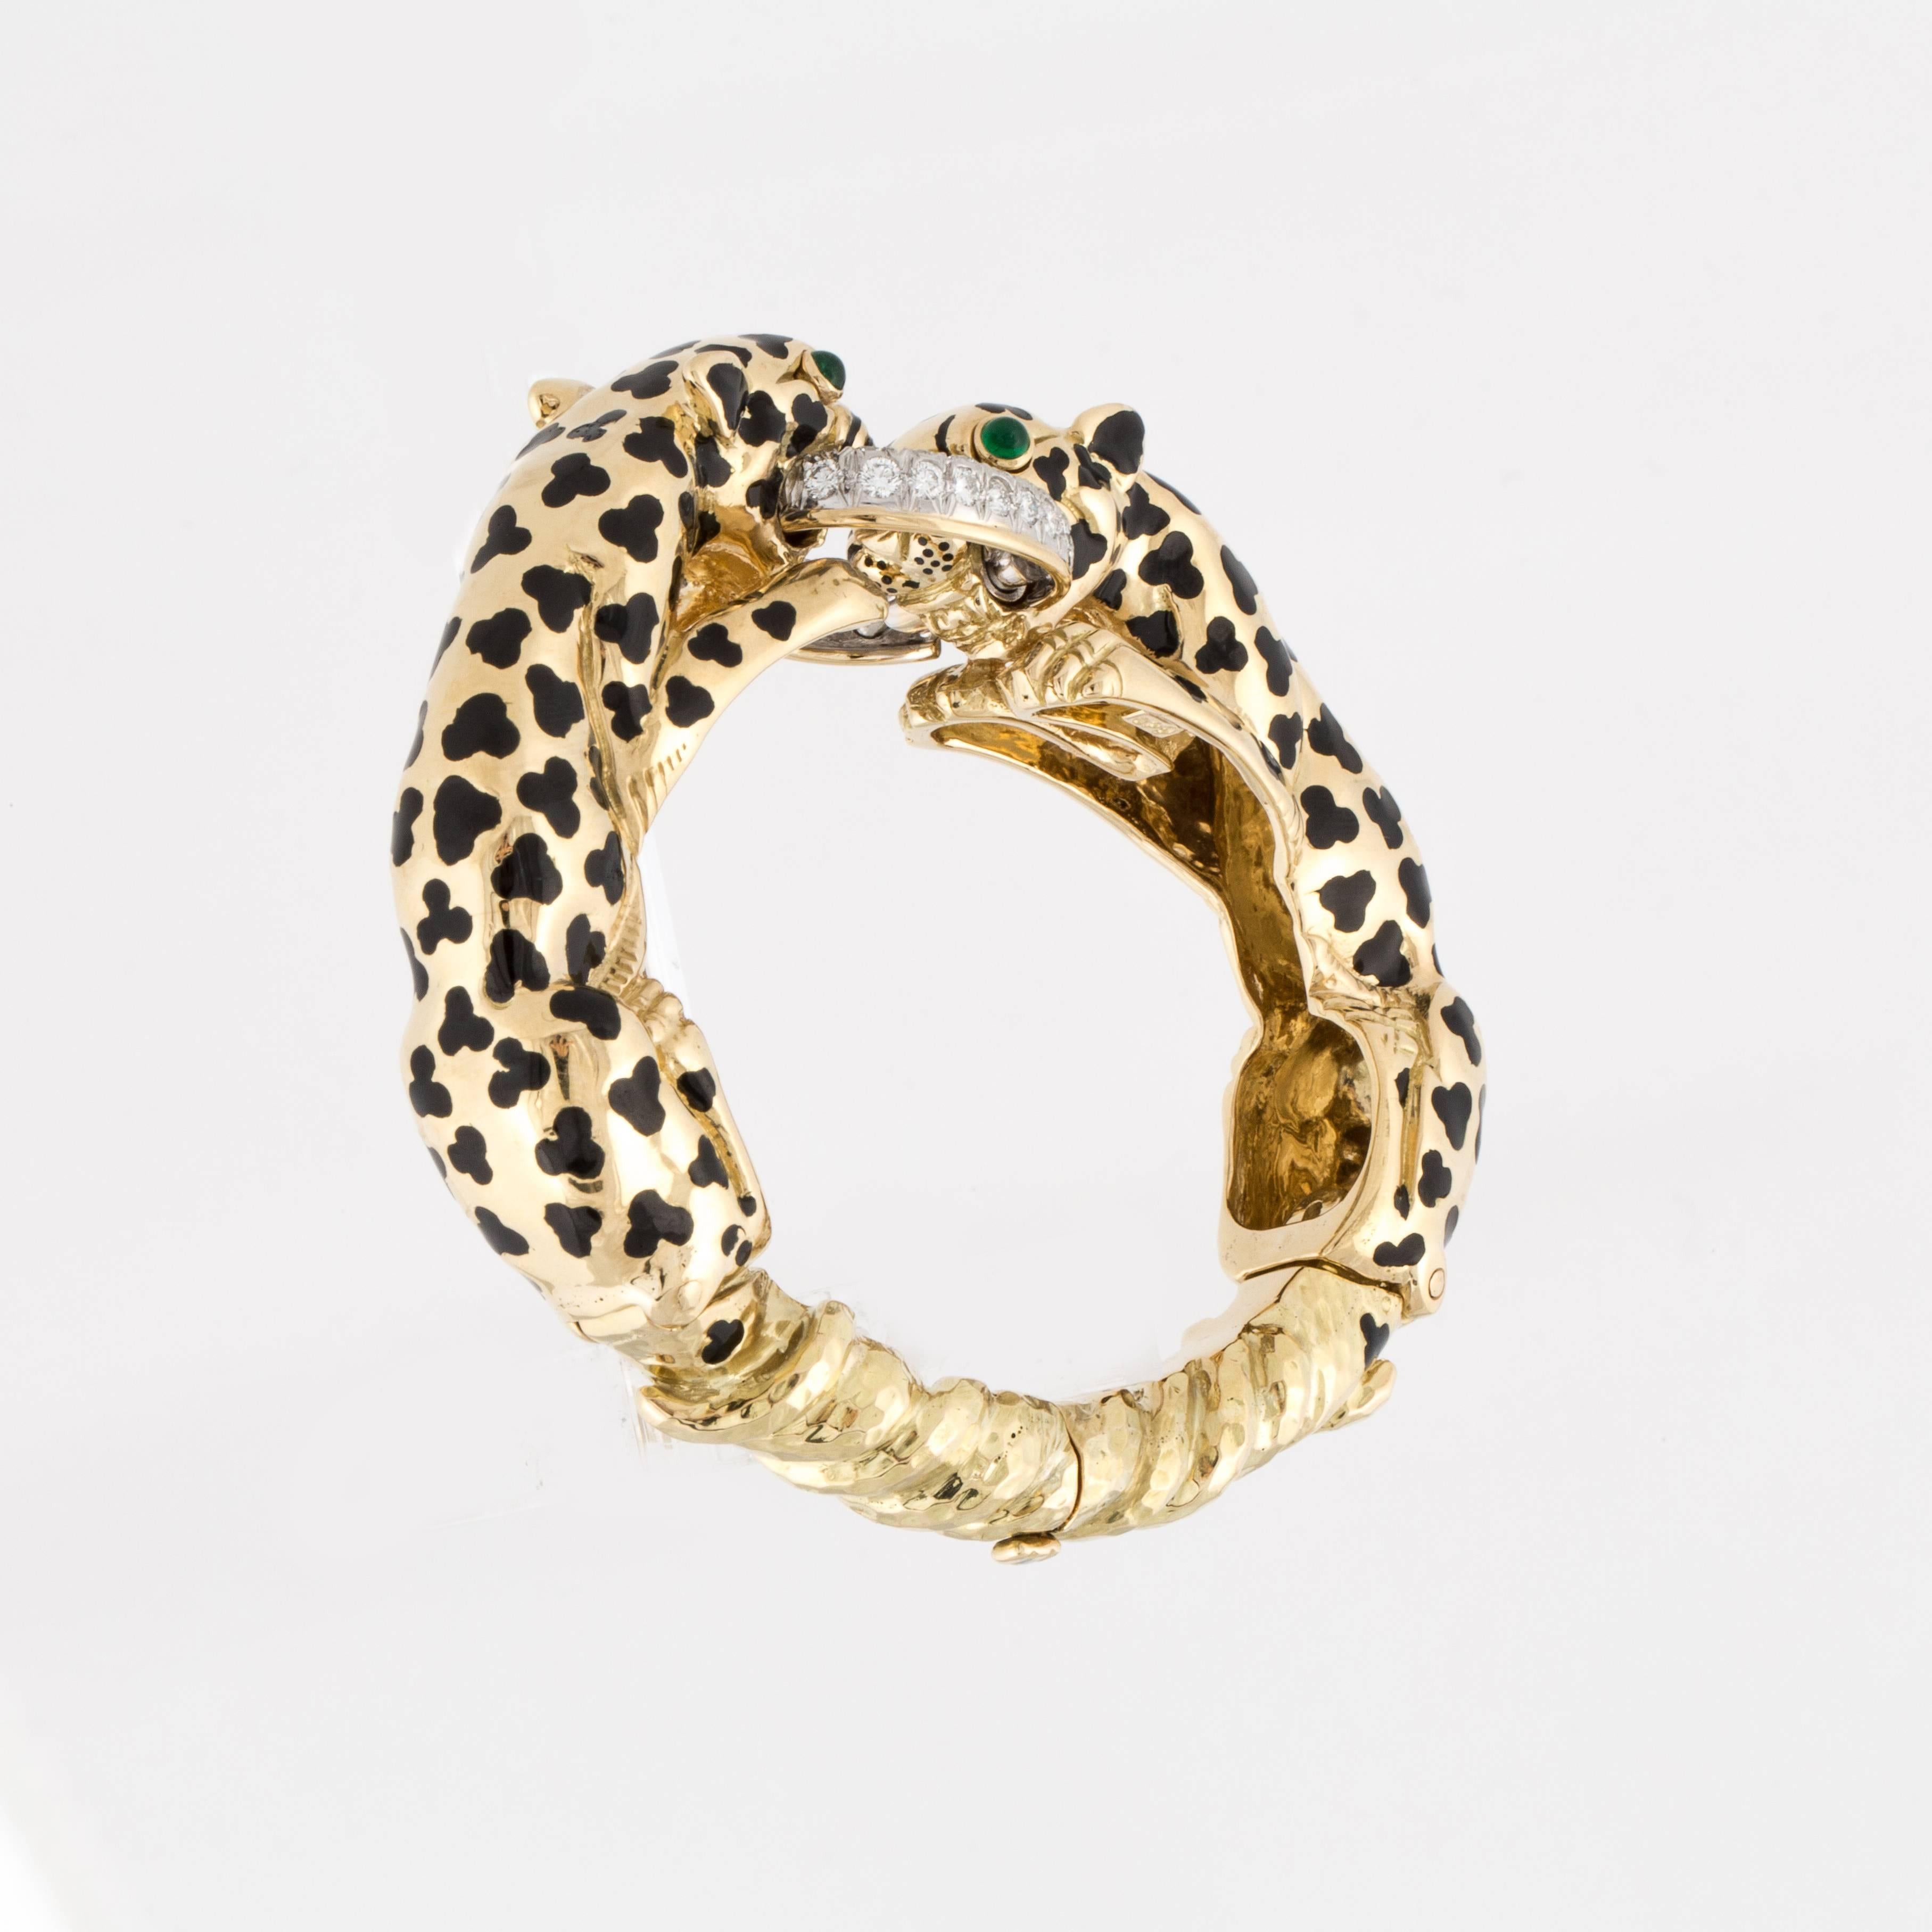 David Webb double leopard bangle bracelet in 18K yellow gold with black enamel spots and emerald eyes.  The leopards are biting a pavé diamond ring with 52 round brilliant-cut diamonds that total 4.15 carats, F-G color and VVS1-VS1 clarity.  The